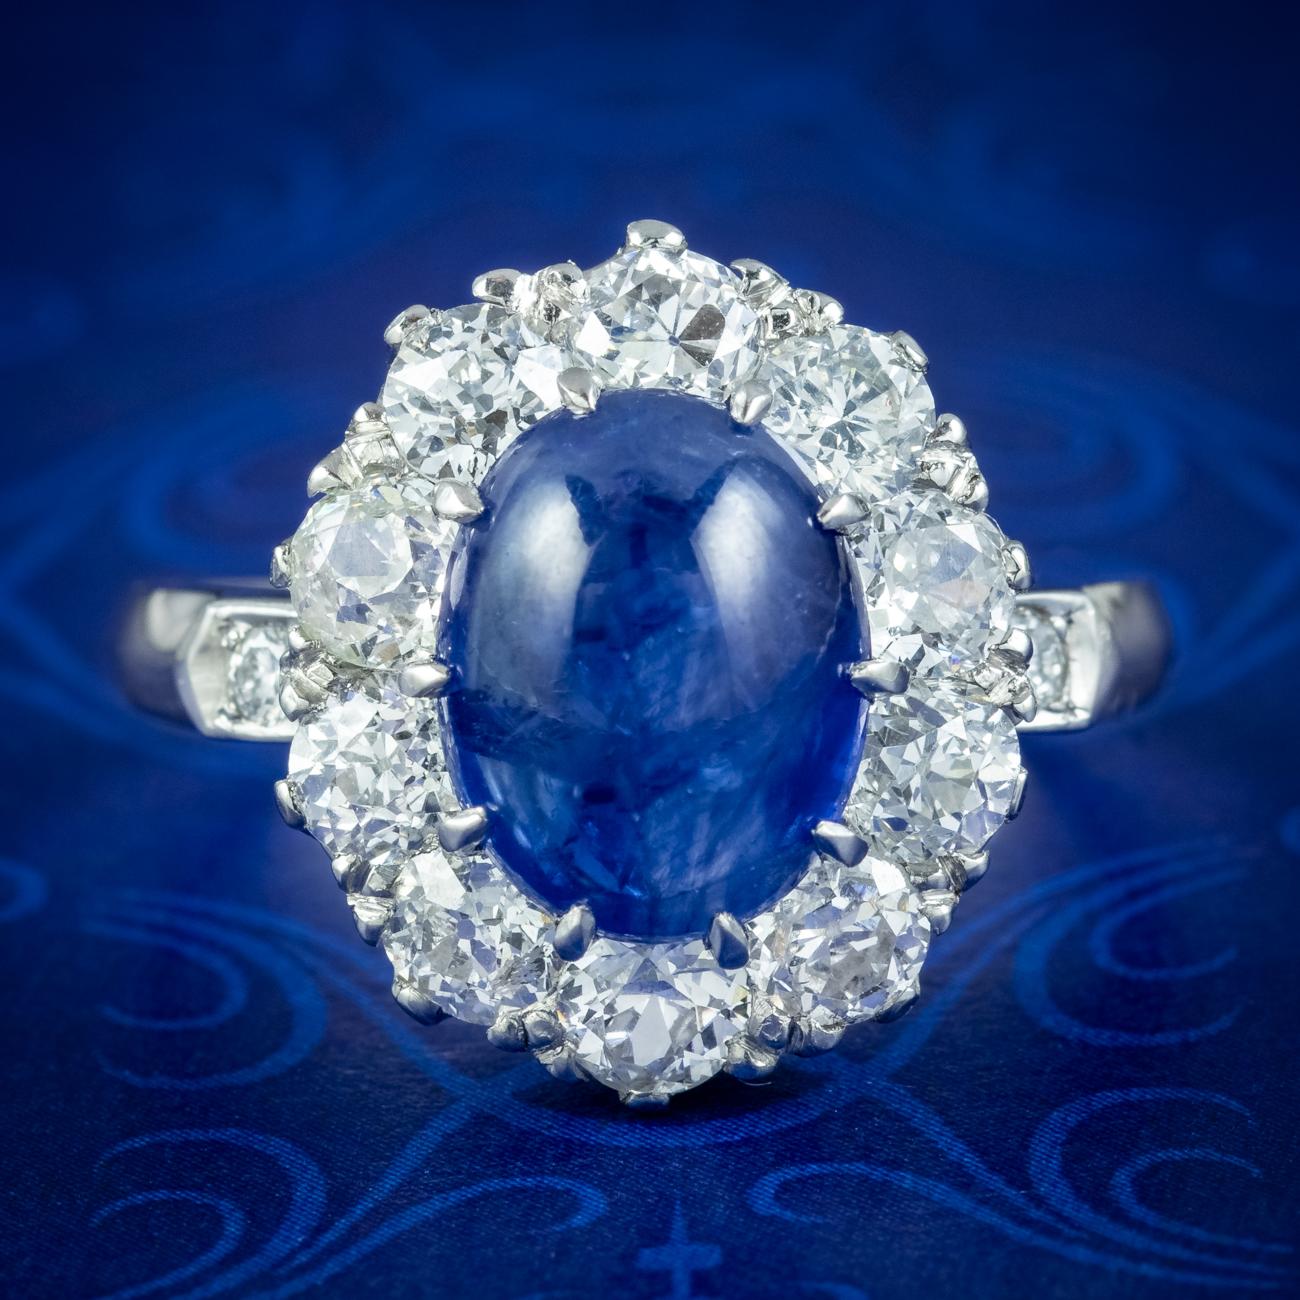 An outstanding Victorian inspired cluster ring claw set with an alluring natural blue cabochon sapphire at its heart, haloed by ten bright old European cut diamonds around the border and an additional one on each shoulder.

The piece is accompanied